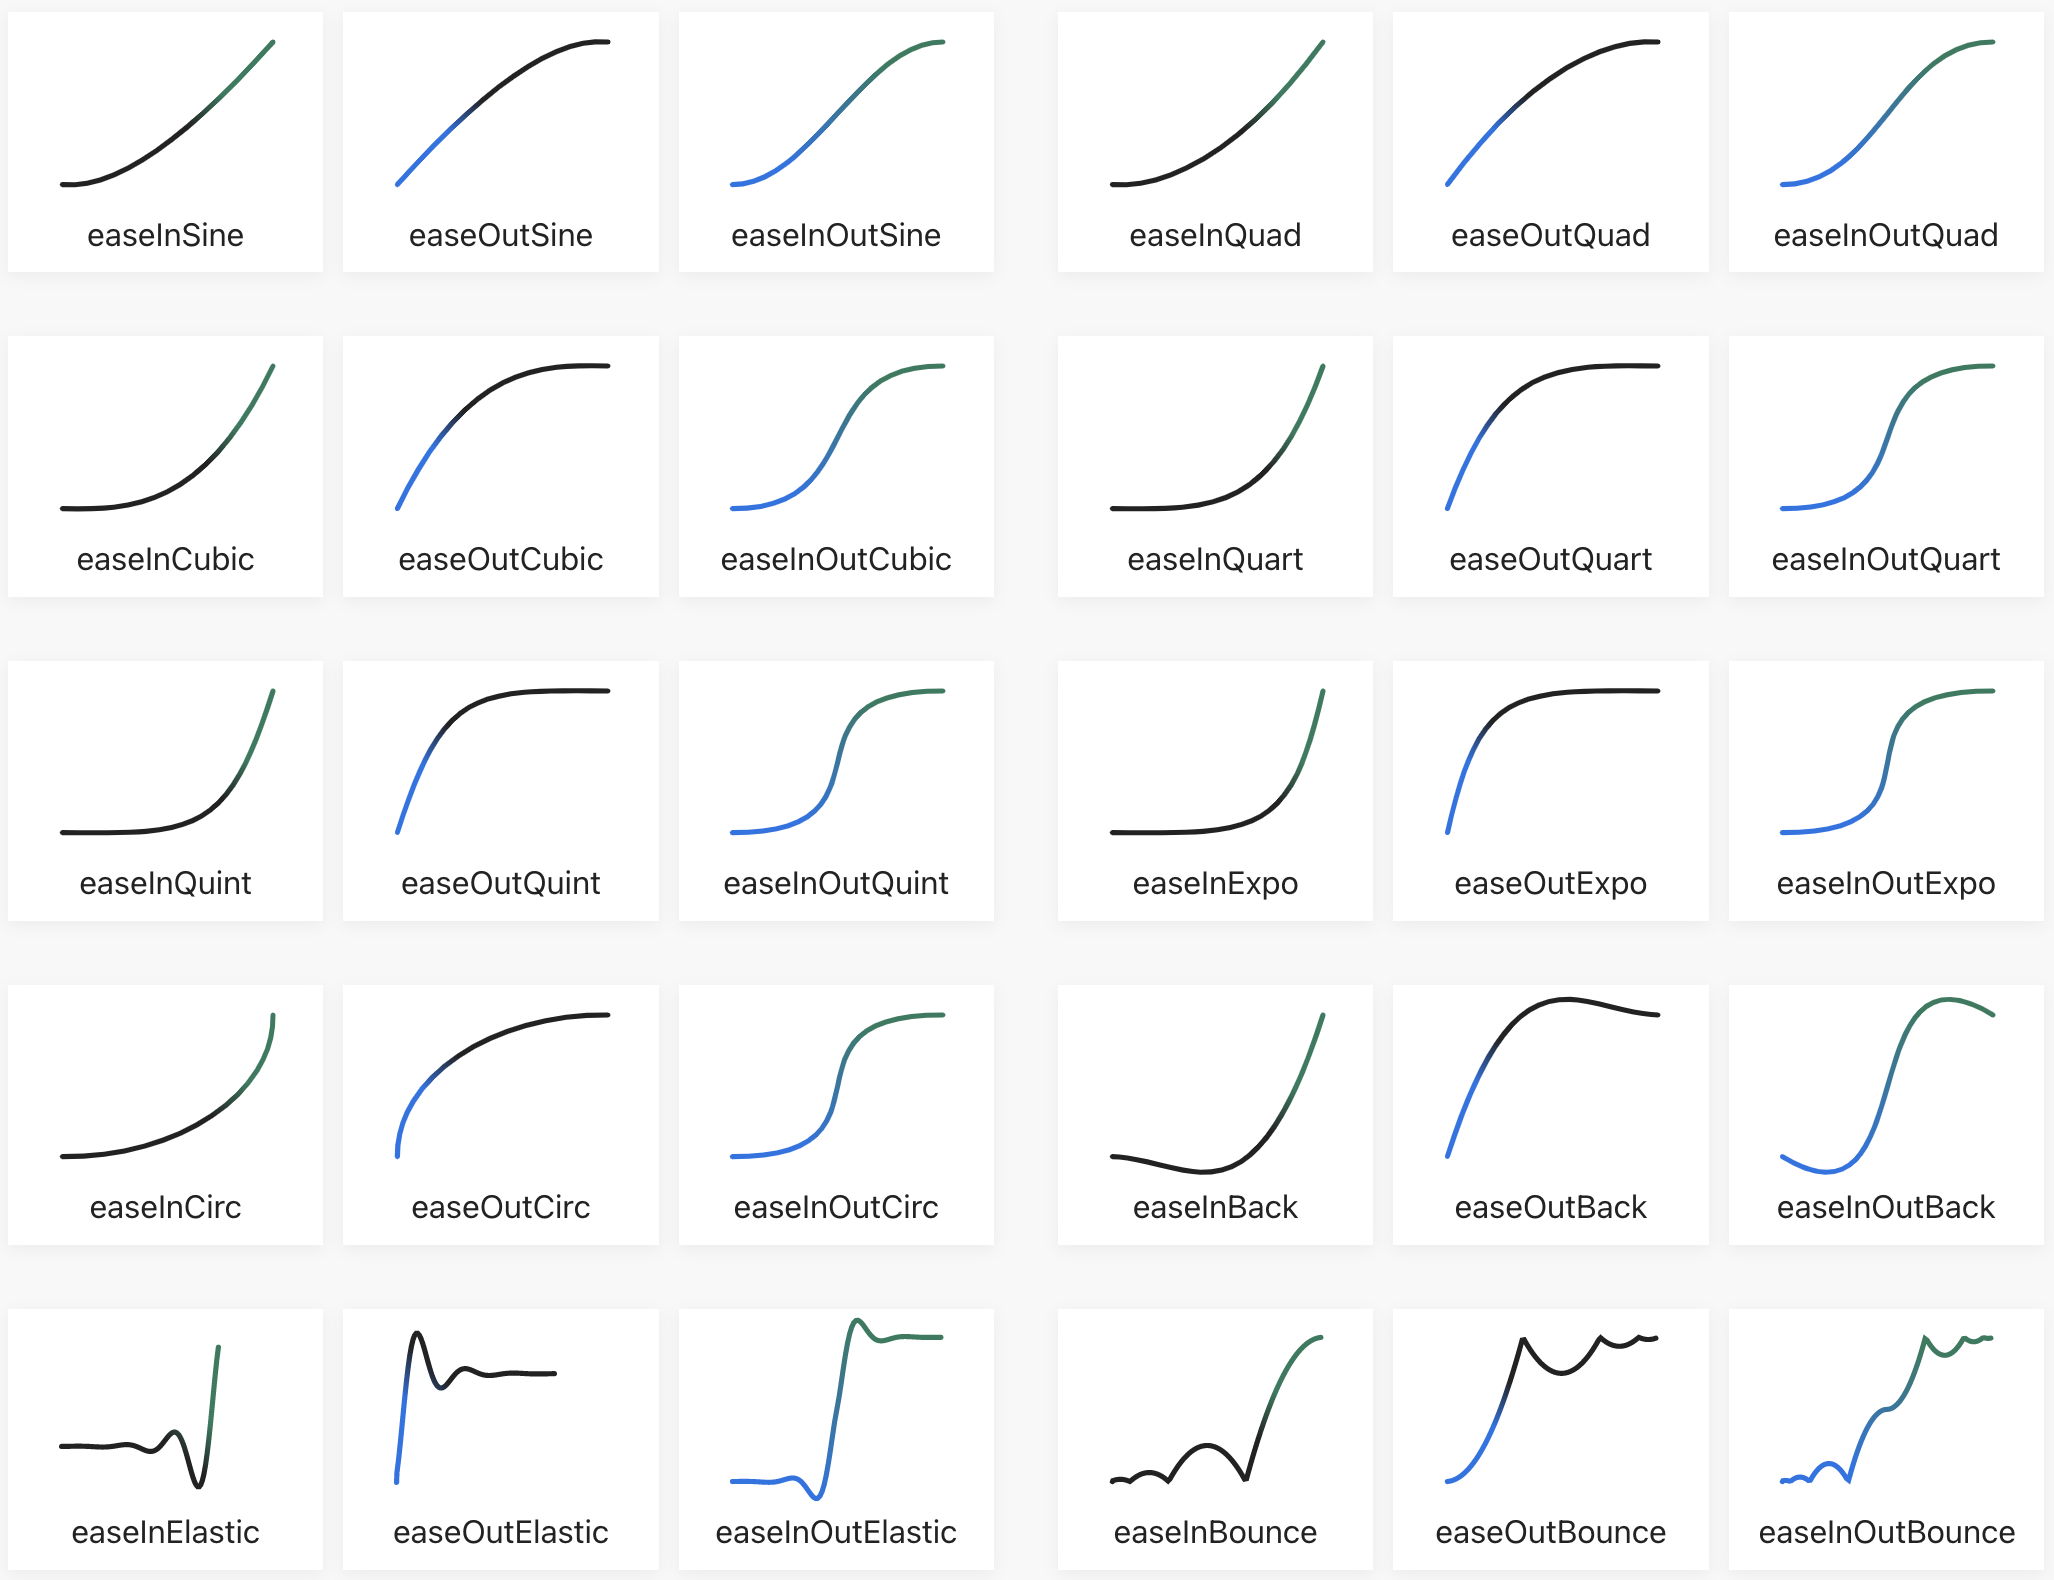 Easing functions visualizations created by Andrey Sitnik and Ivan Solovev